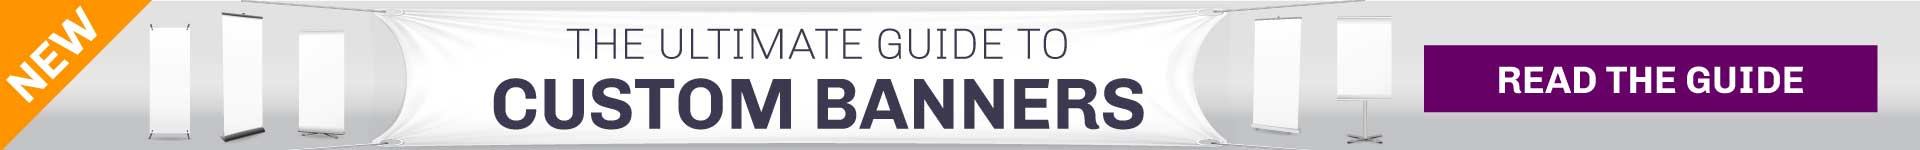 Get the Guide to Banners